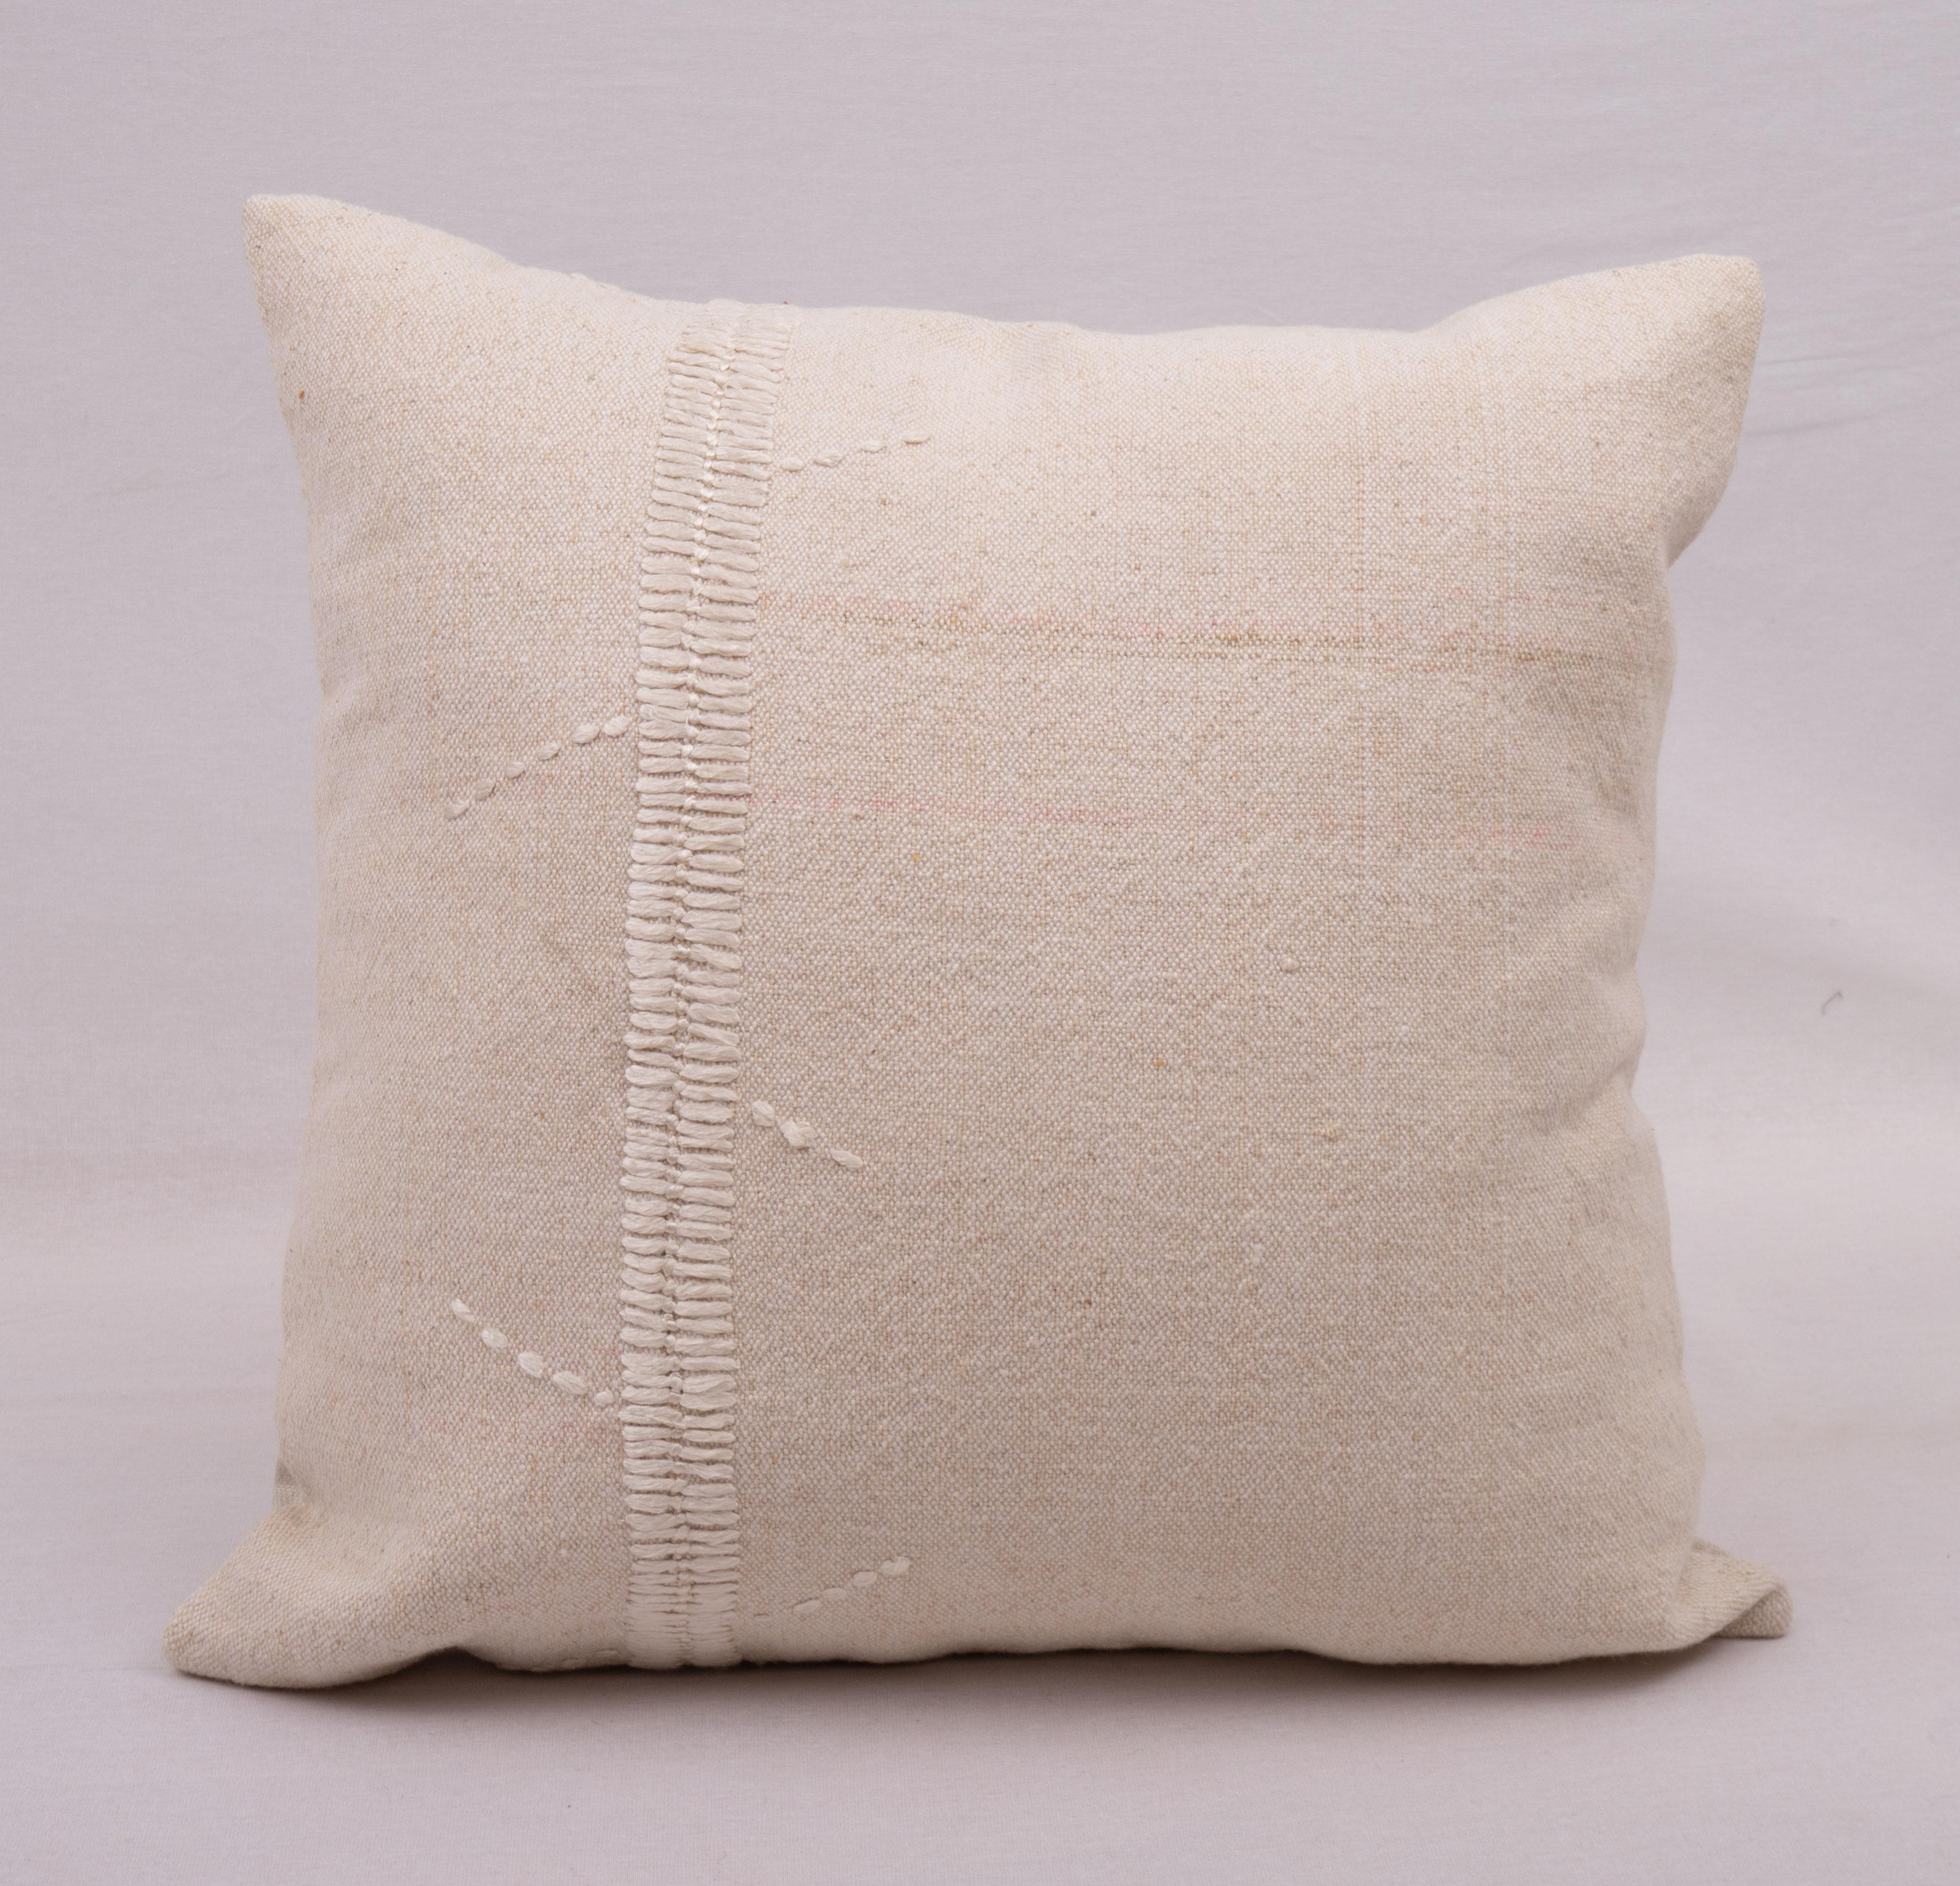 This pillow case is made from a vintage Anatolian cotton cover. Hand done silk stitching on it is our addition to the piece to give it a fine detail.

It does not come with inserts.
linen in the back.
Zipper closure.
Dry Cleaning is